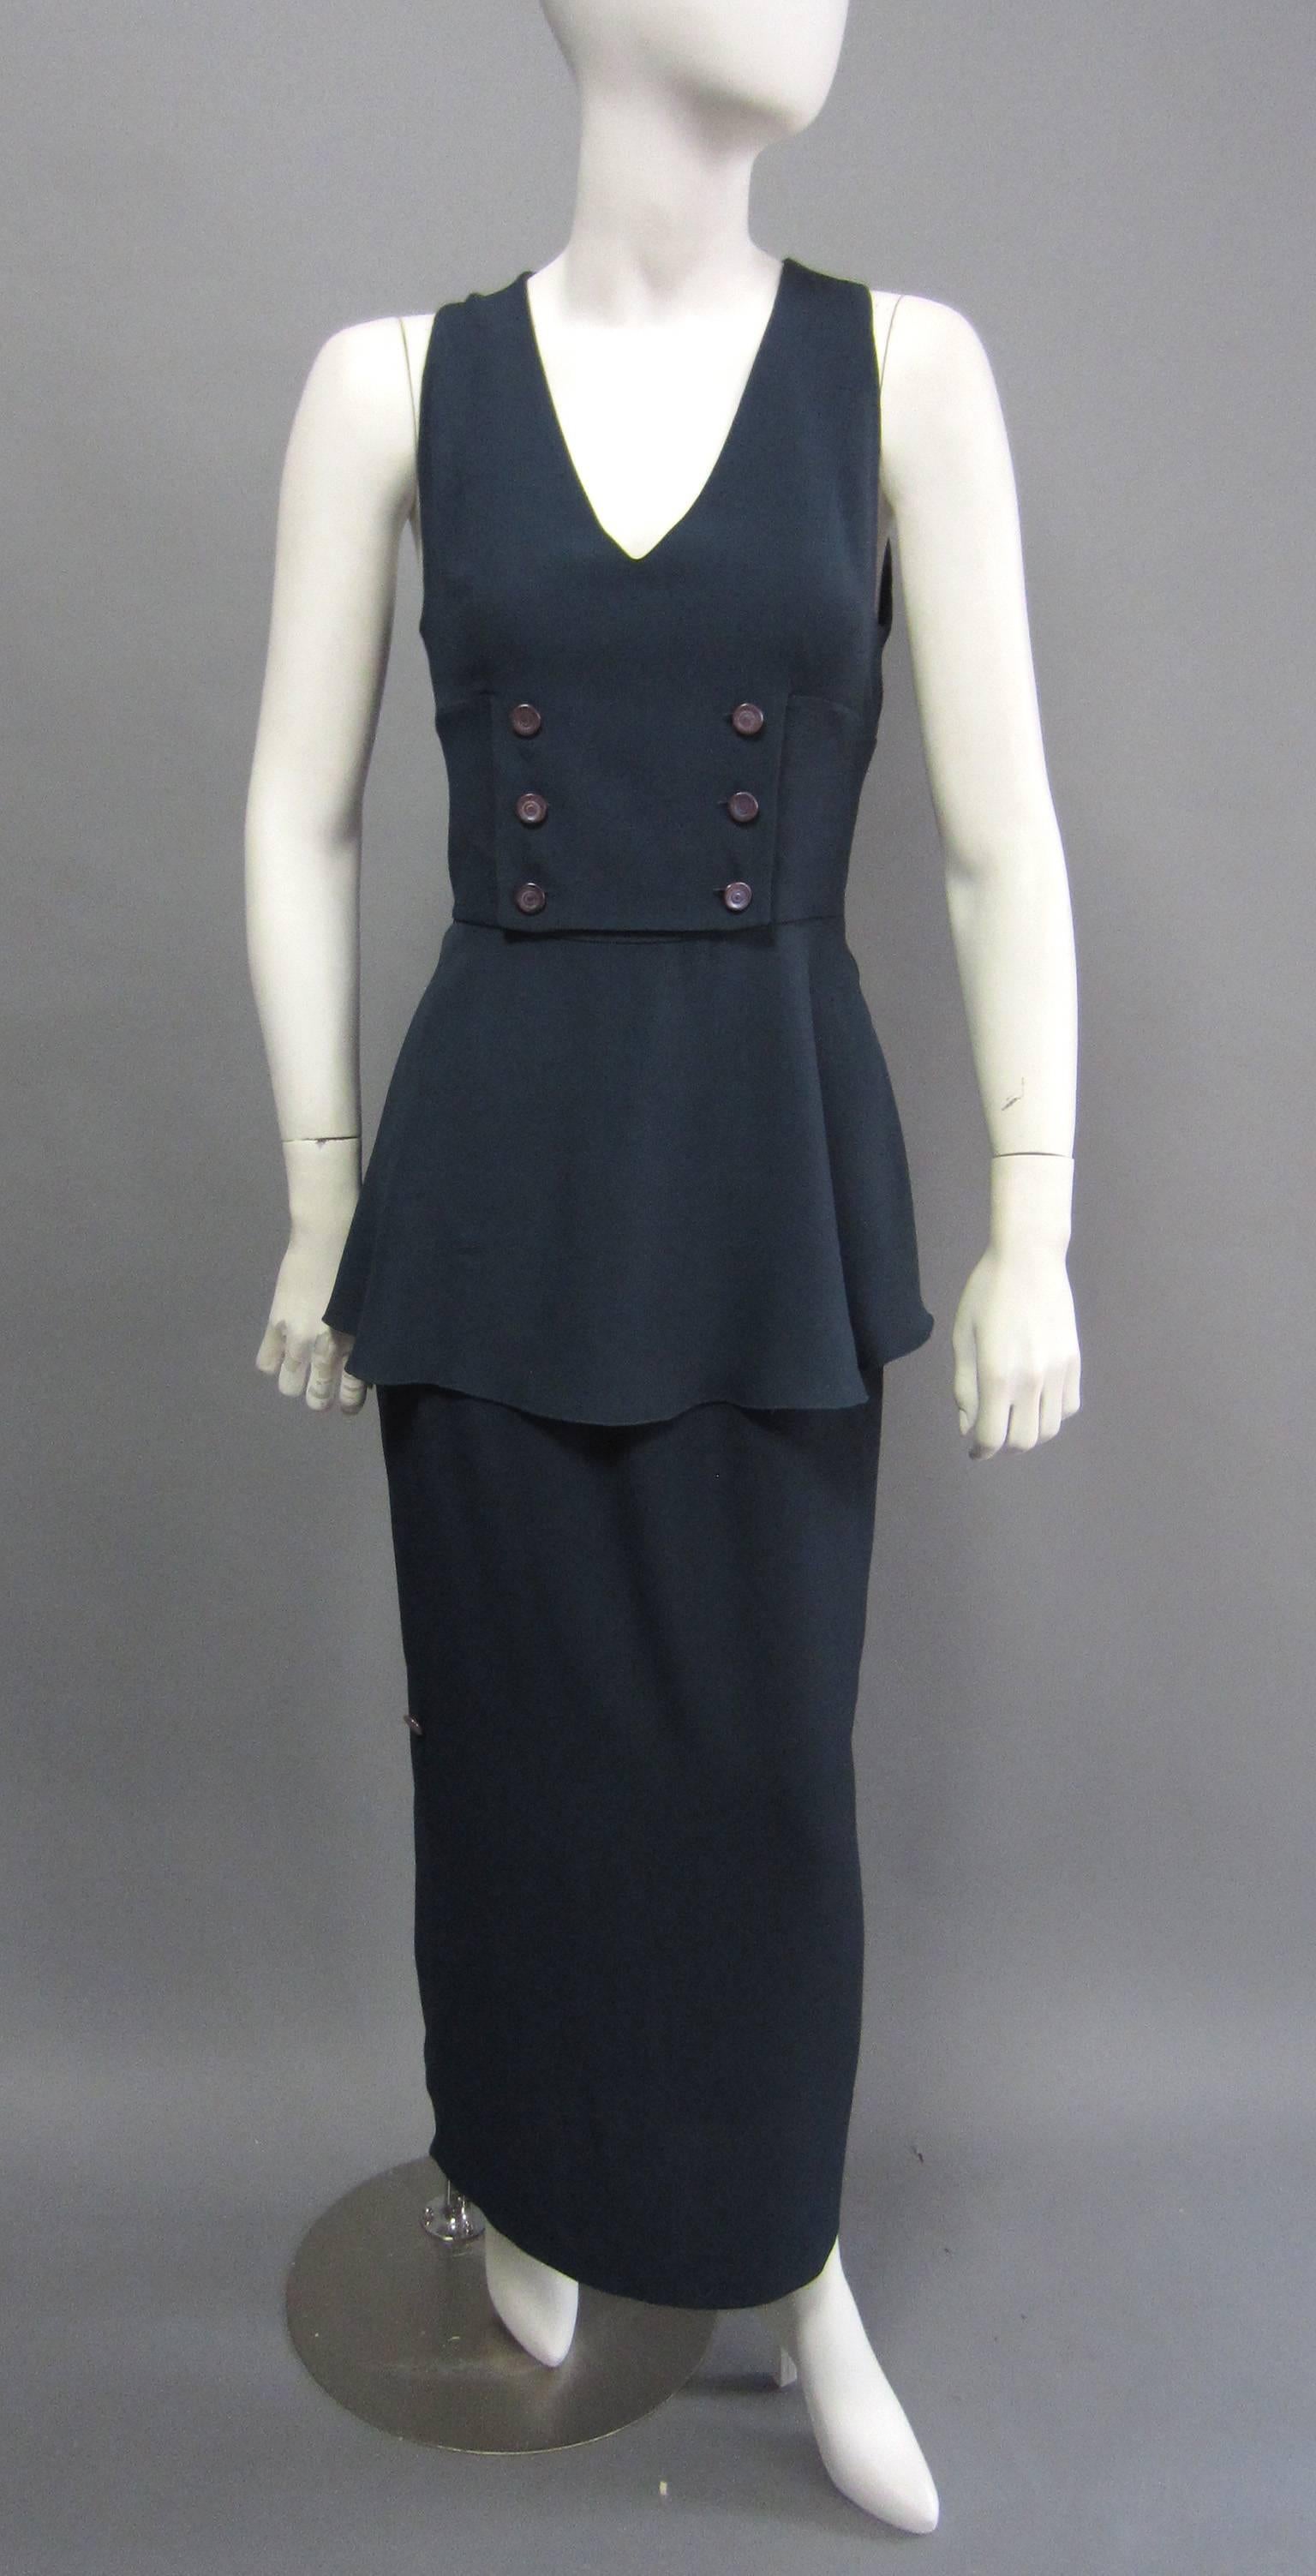 CHLOE 3 piece Ensemble with Jacket, Top & Skirt with Button Detail In Excellent Condition For Sale In New York, NY